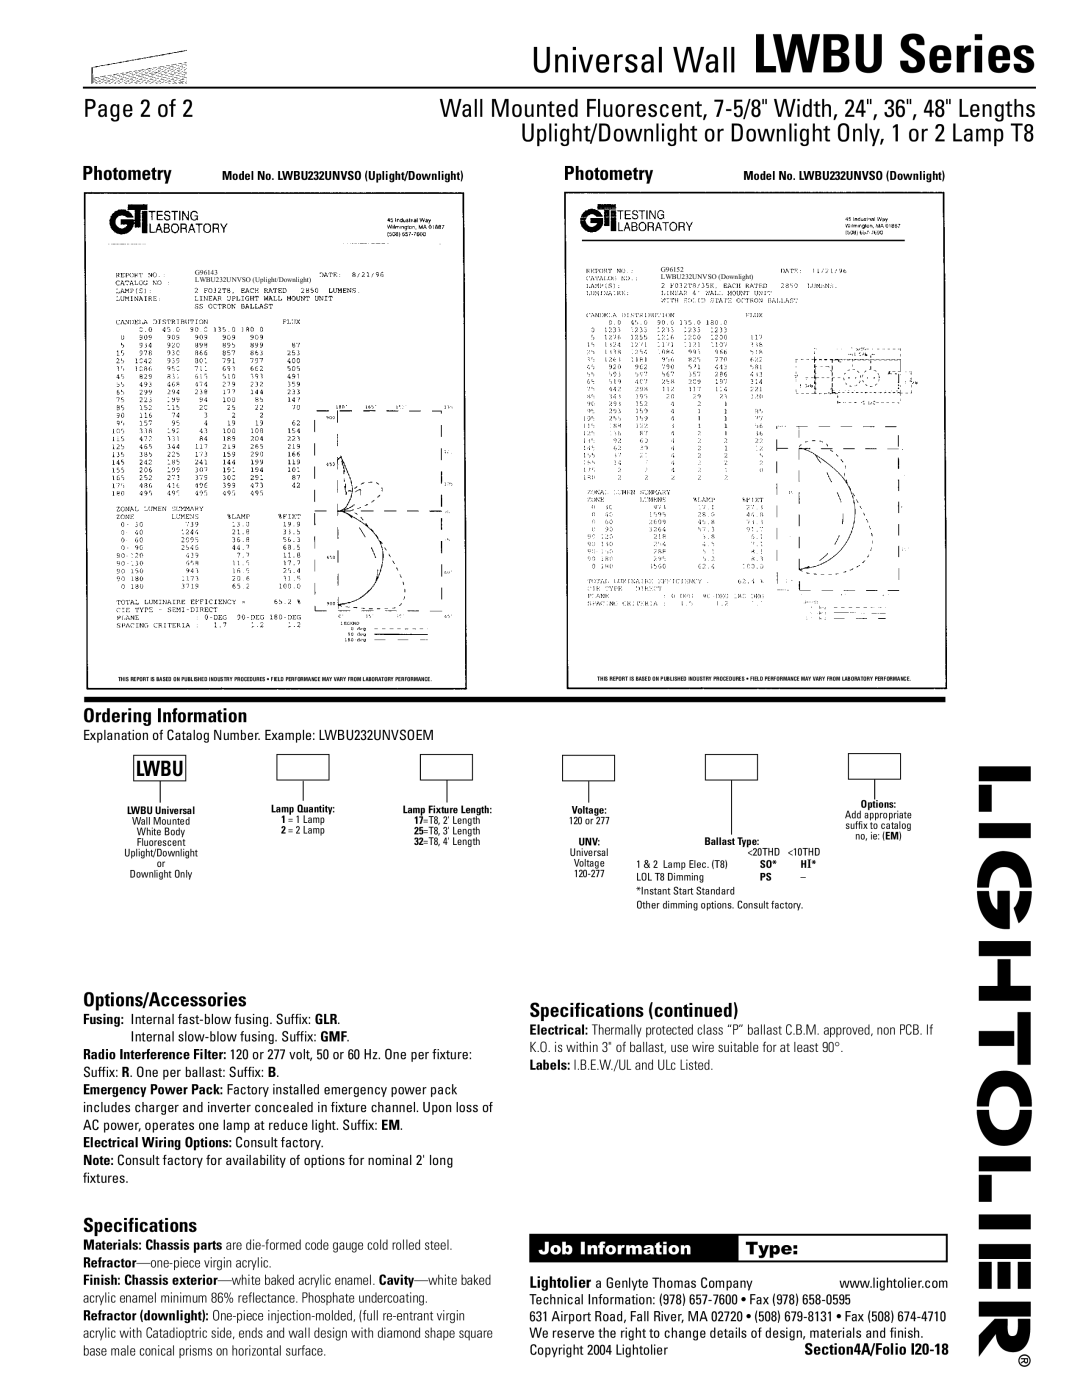 Lightolier LWBU Series Page 2 of, Photometry, Ordering Information, Options/Accessories, Specifications continued, Lwbu 